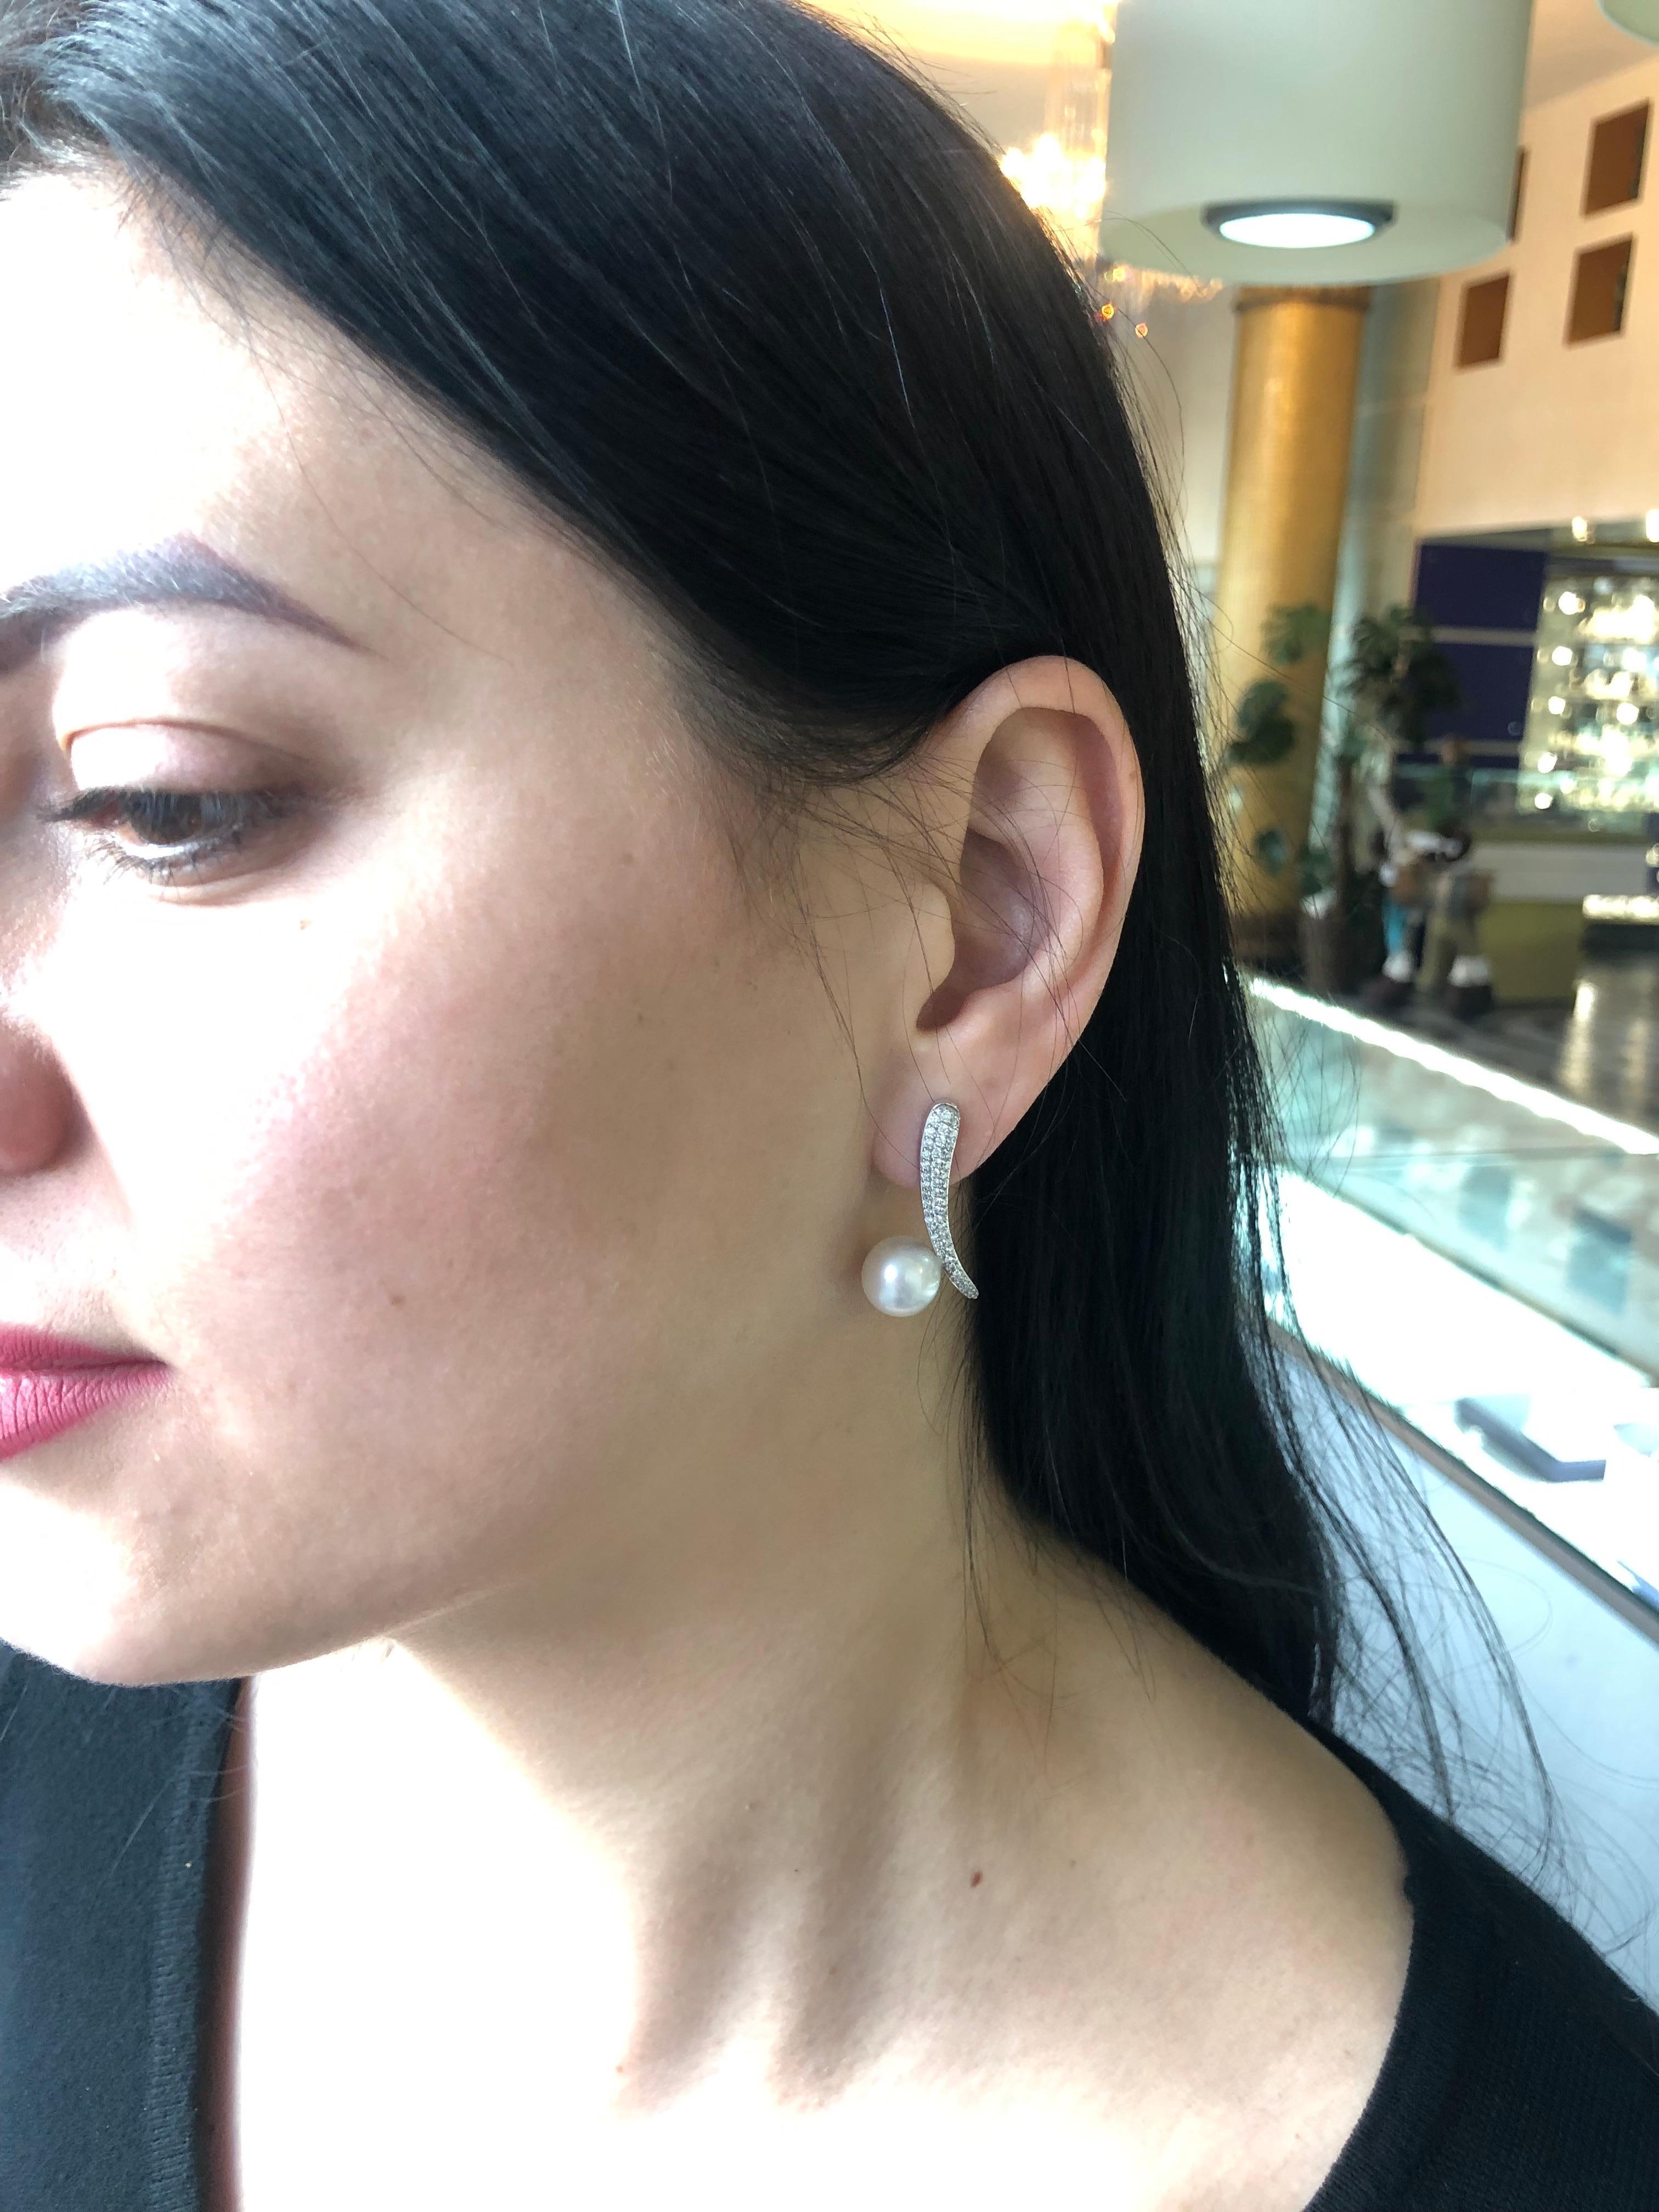 Earrings White Gold 14 K
Diamond 6-Round 57-0,16-3/5A
Diamond 74-Round 57-0,44-3/5A
Pearl d 10,0-10,5 2-0 ct
Weight 7,53

With a heritage of ancient fine Swiss jewelry traditions, NATKINA is a Geneva based jewellery brand, which creates modern